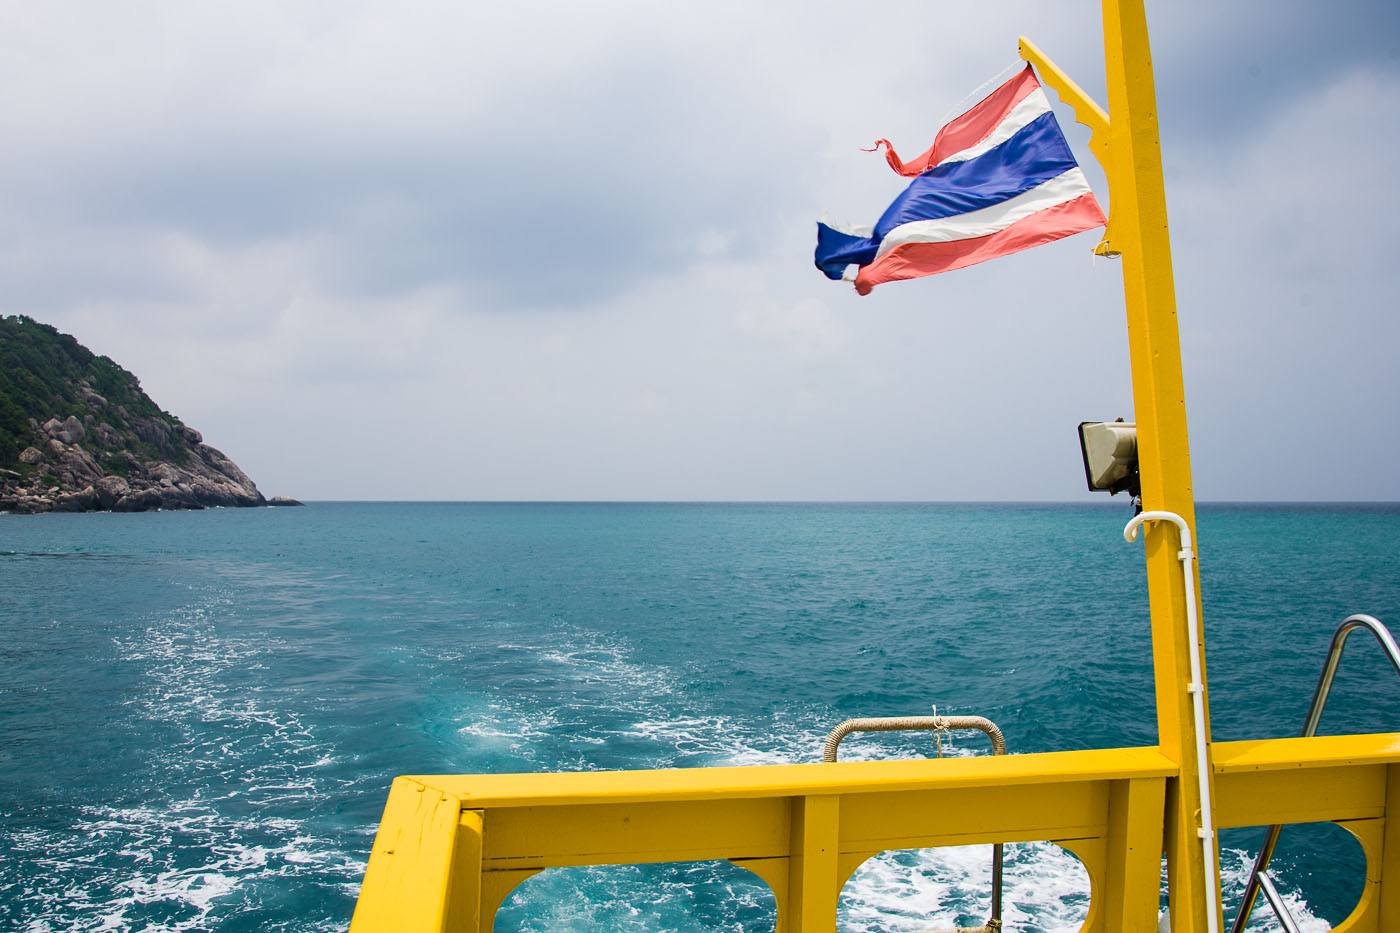 Stern of dive boat and flag near Koh Tao, Thailand